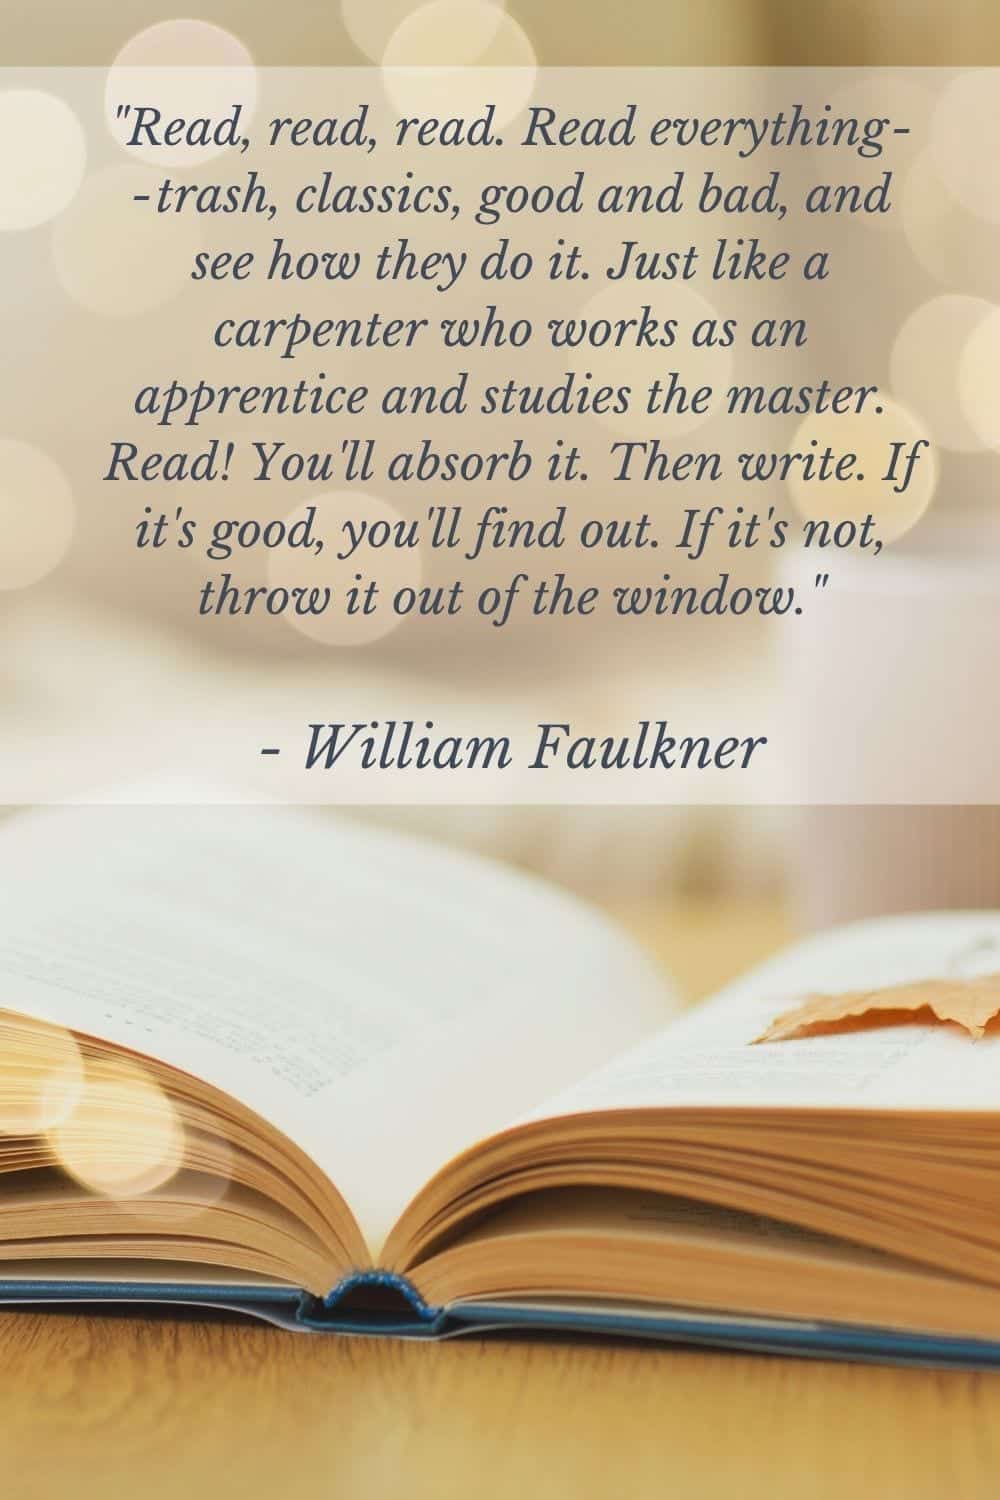 Faulkner quote on writing